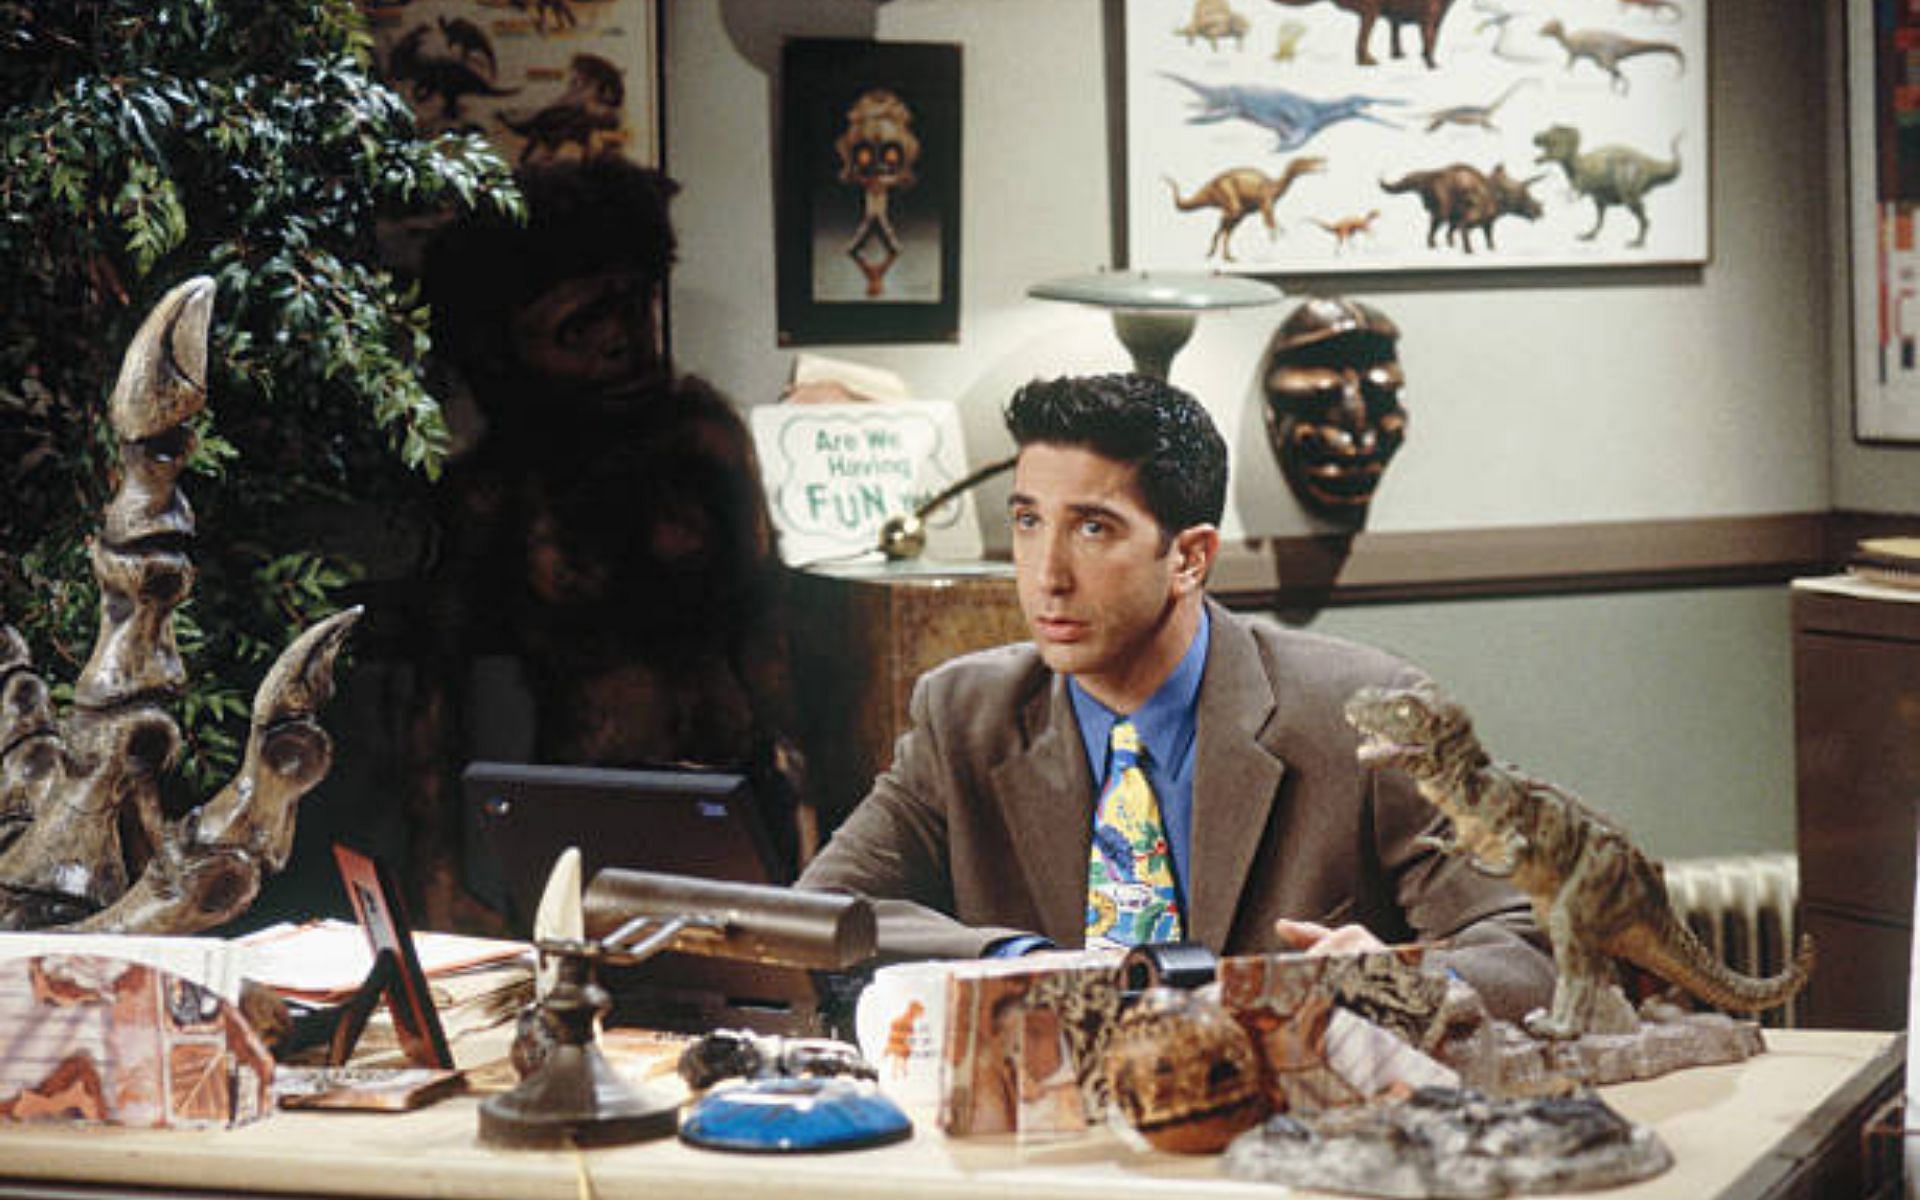 David Schwimmer as Ross Geller on Friends (Image via Getty Images)